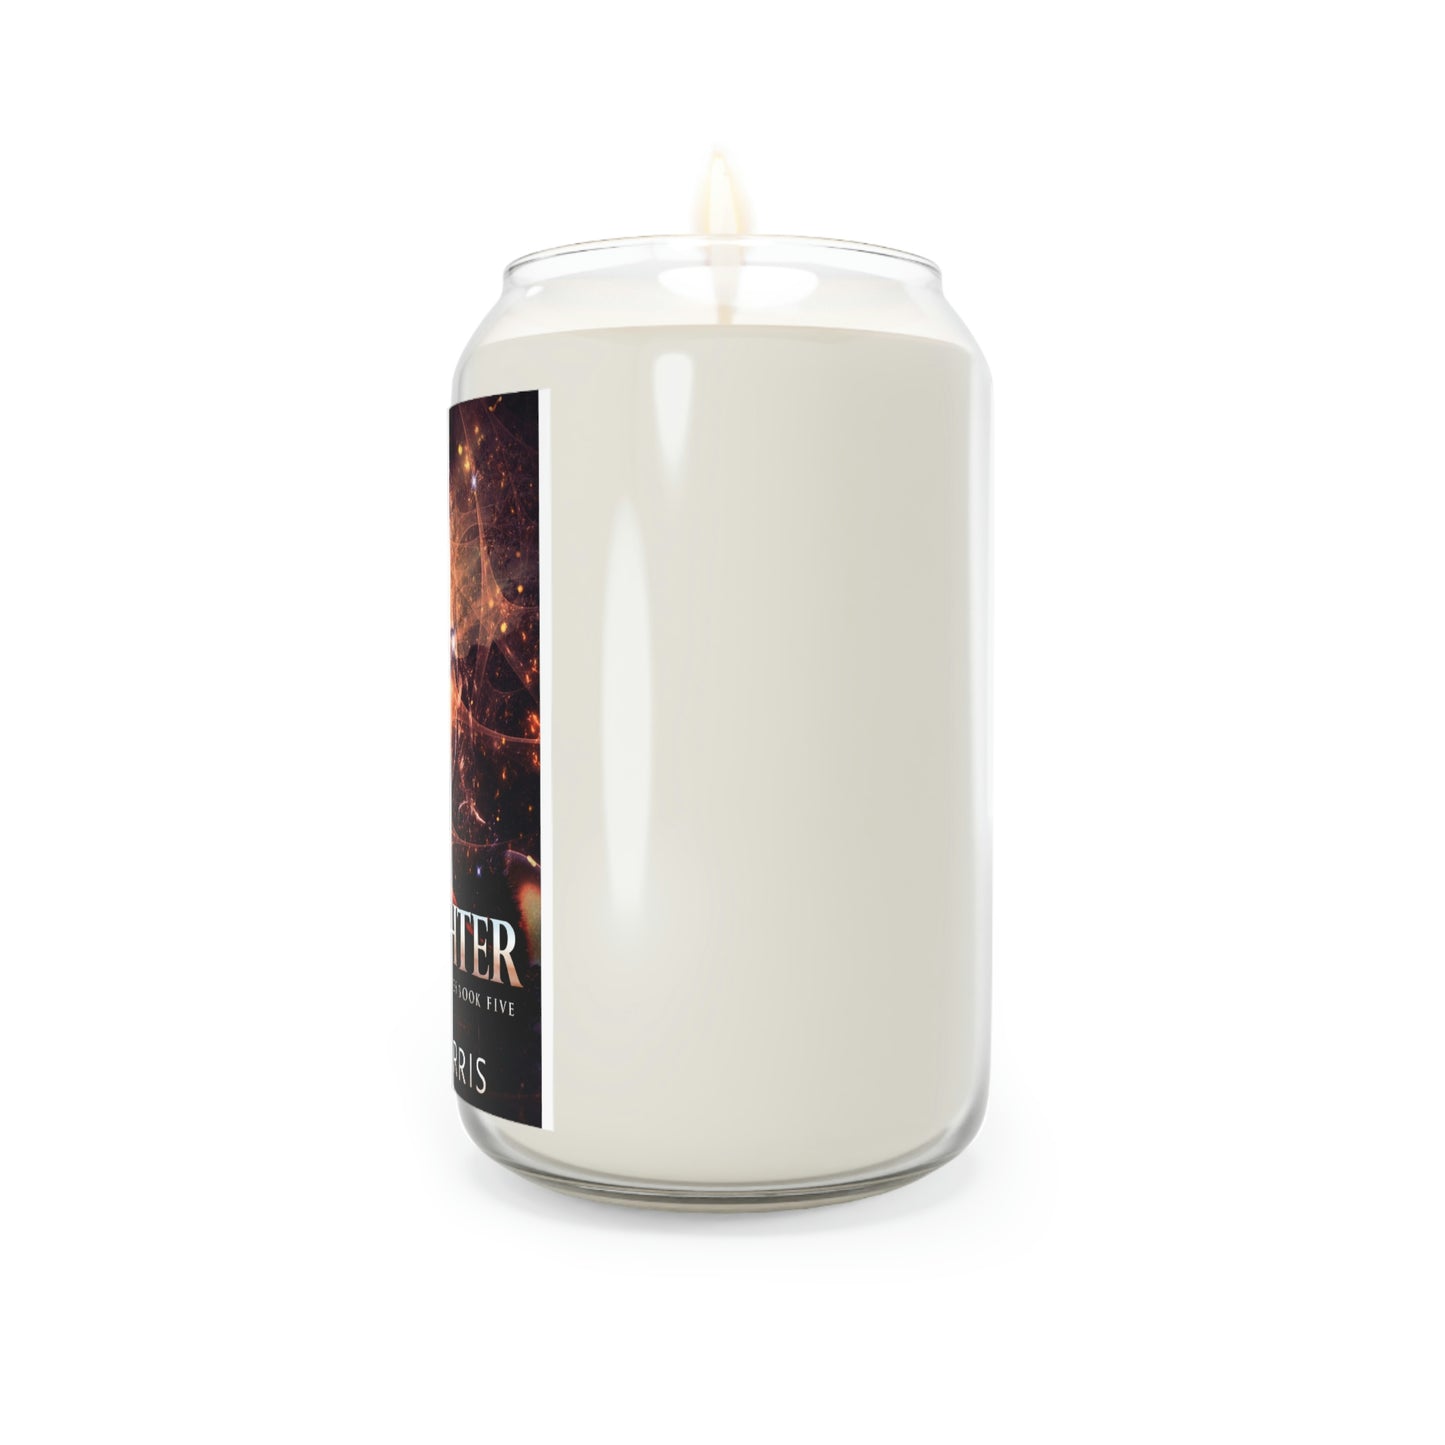 Gaslighter - Scented Candle